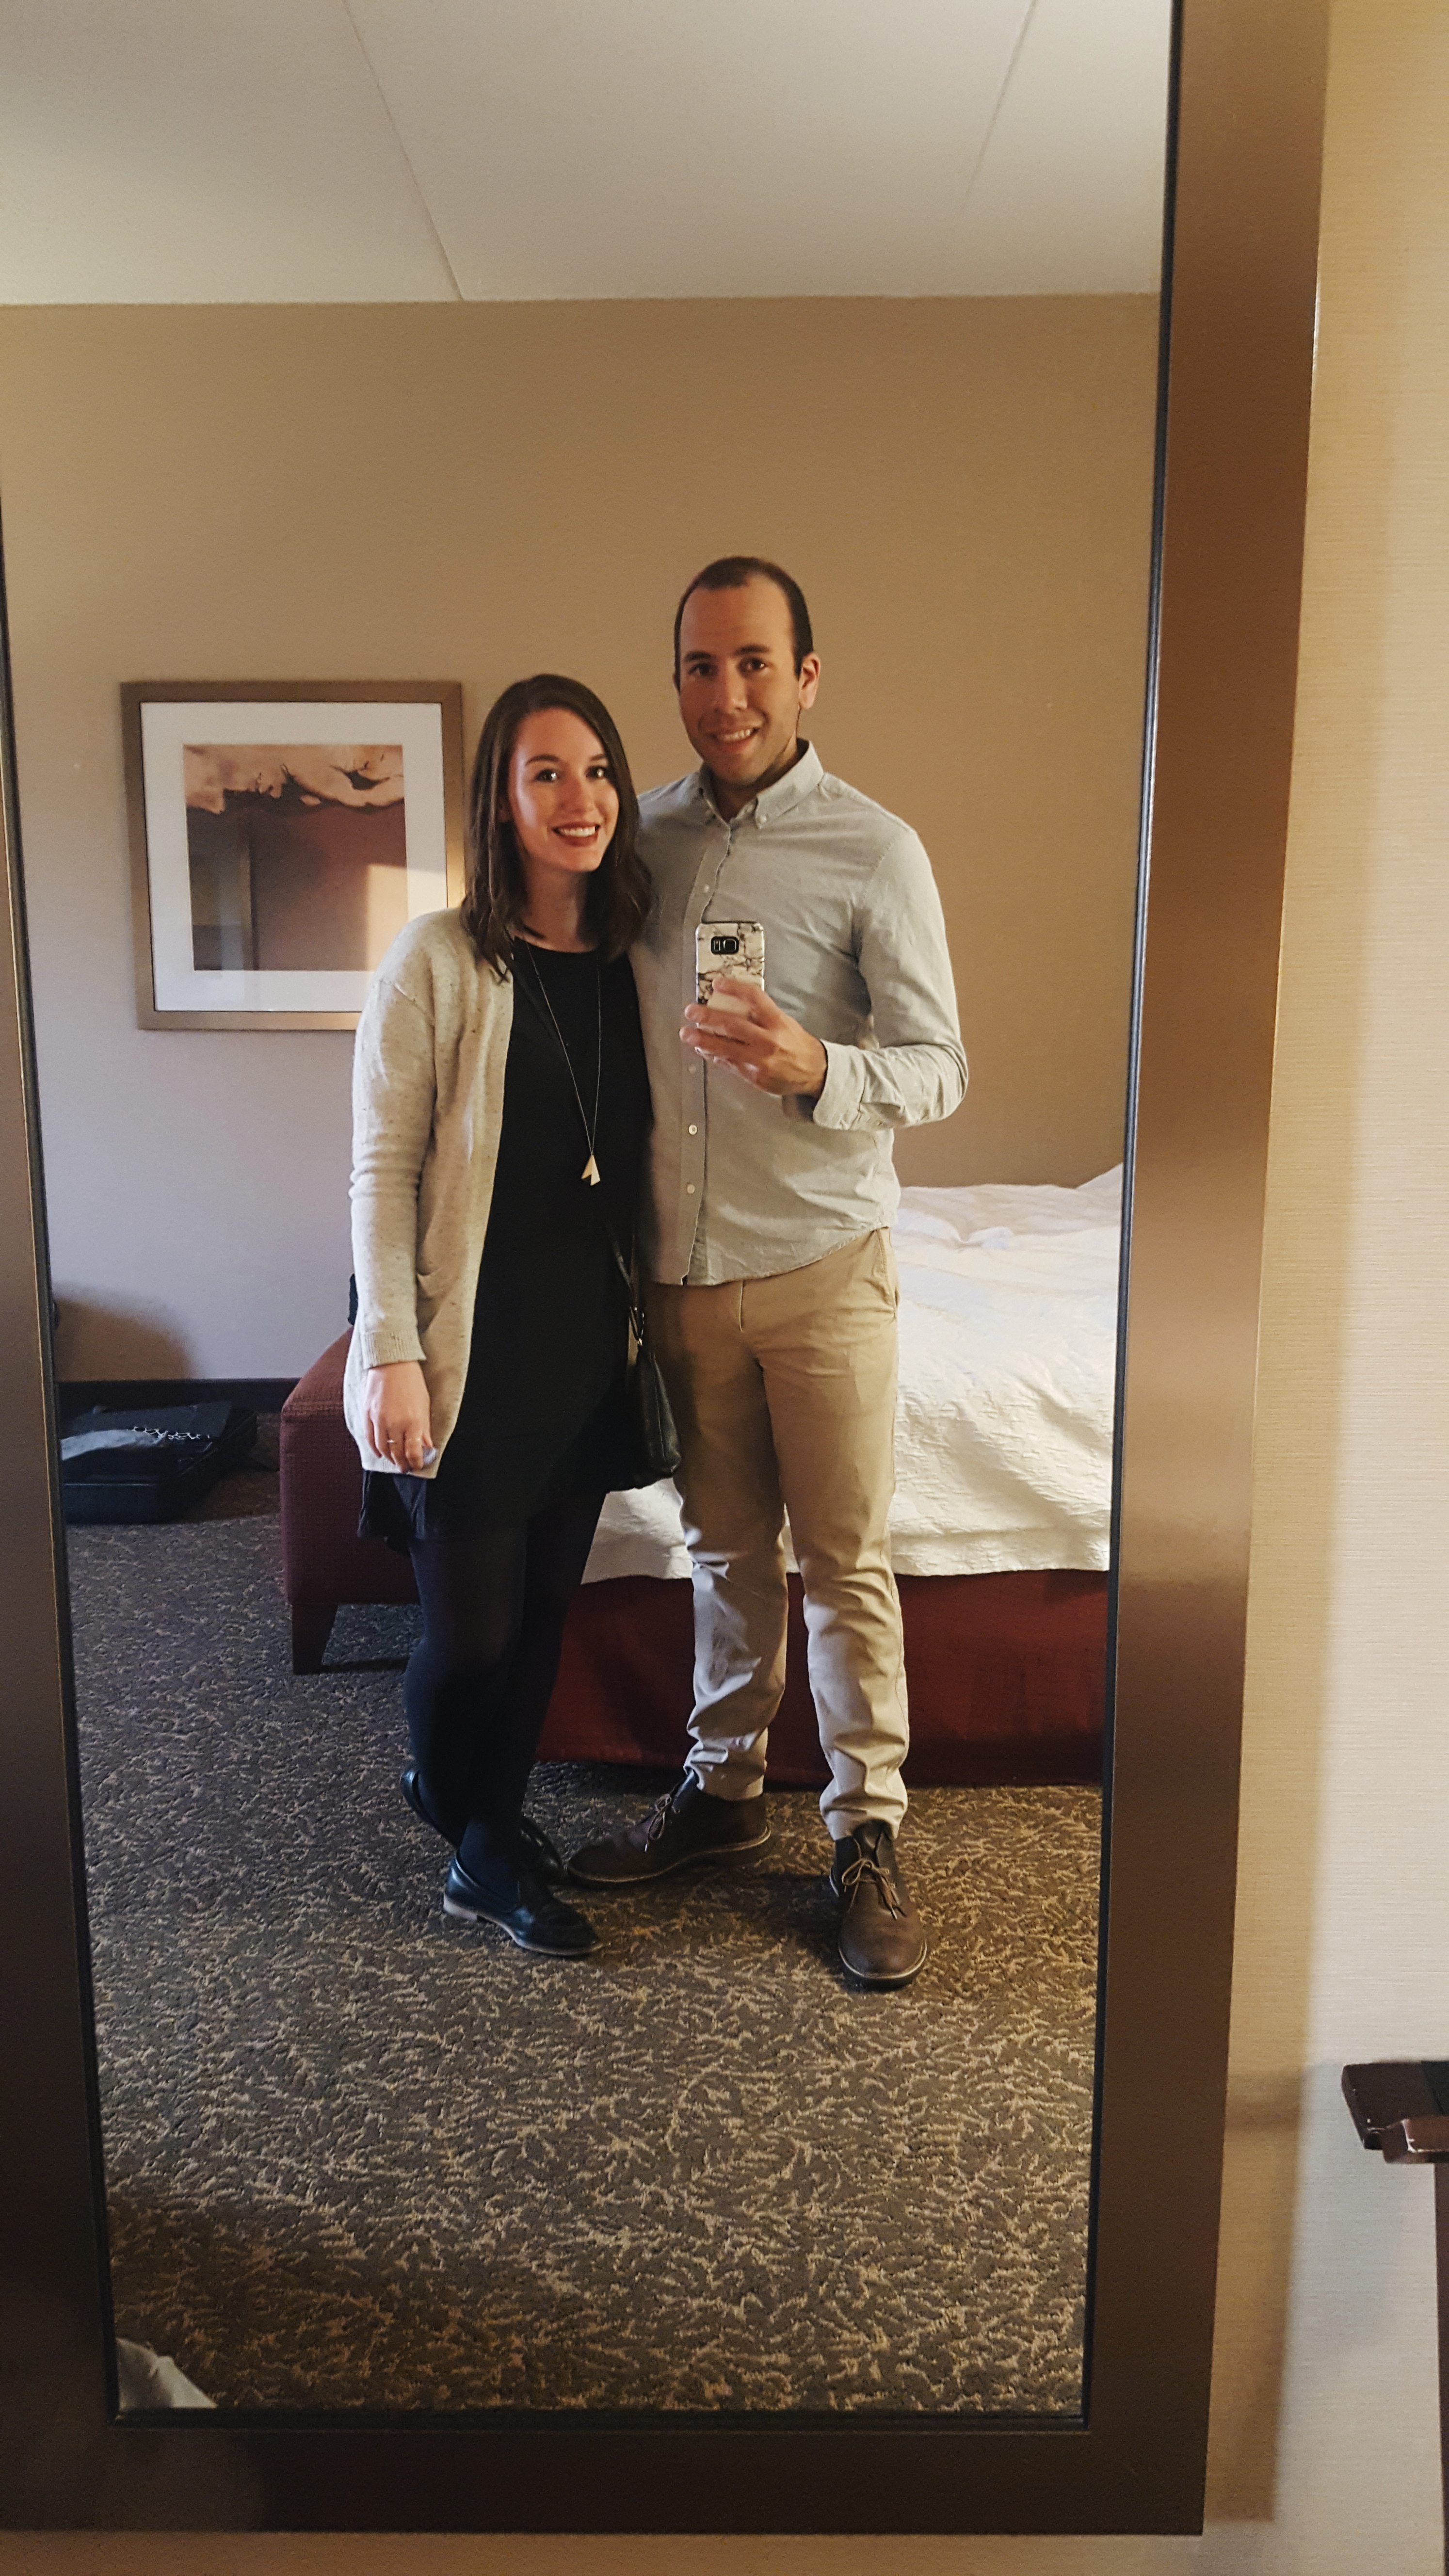 Alyssa and Michael are dressed up for dinner, taking a mirror selfie